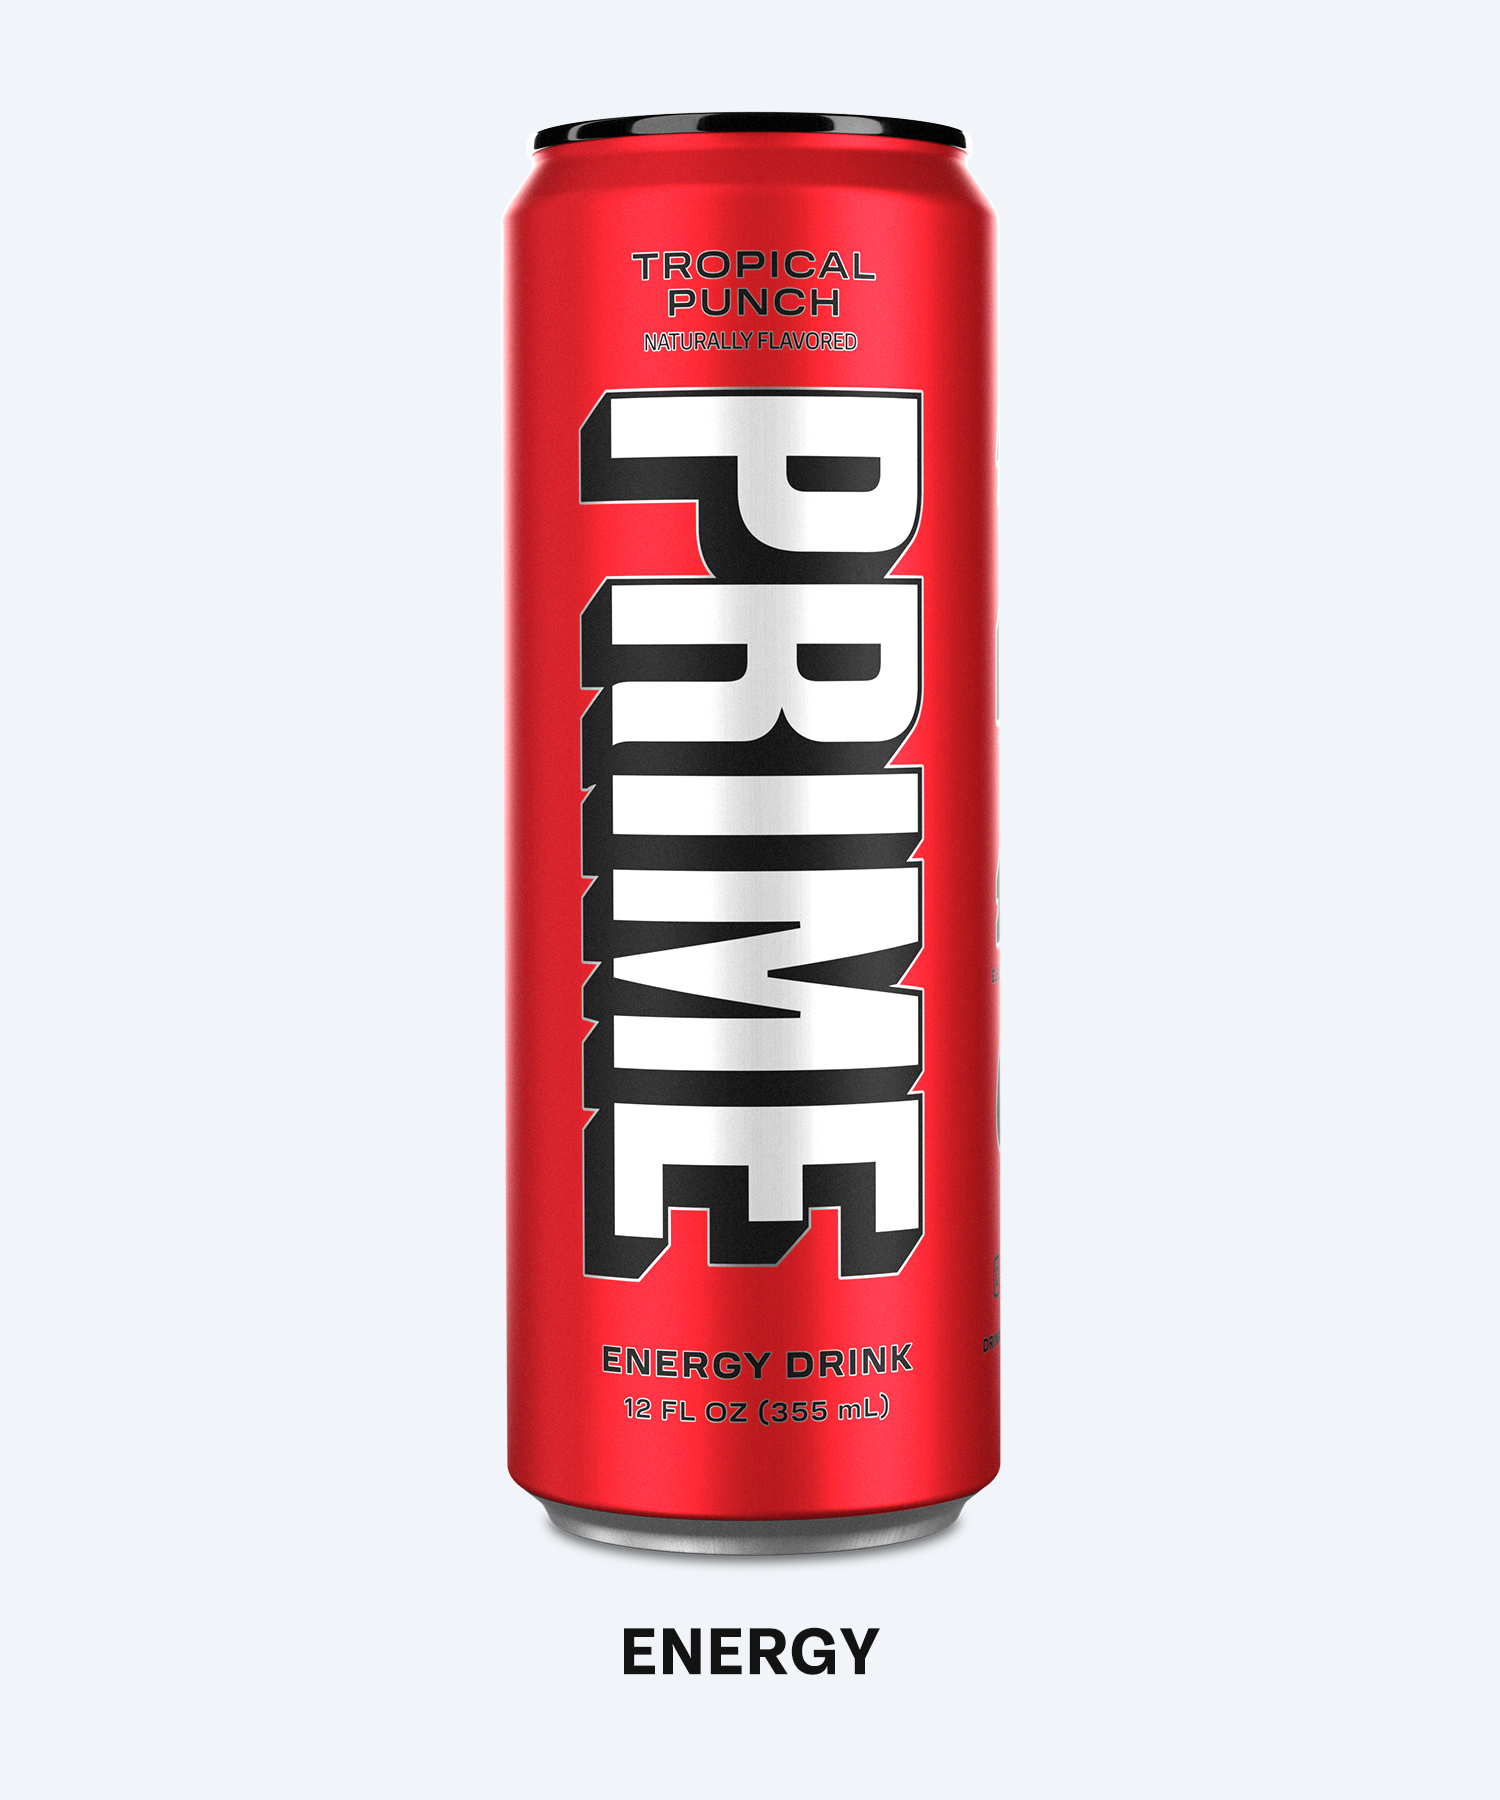 A Prime energy drink in flavor tropical punch.